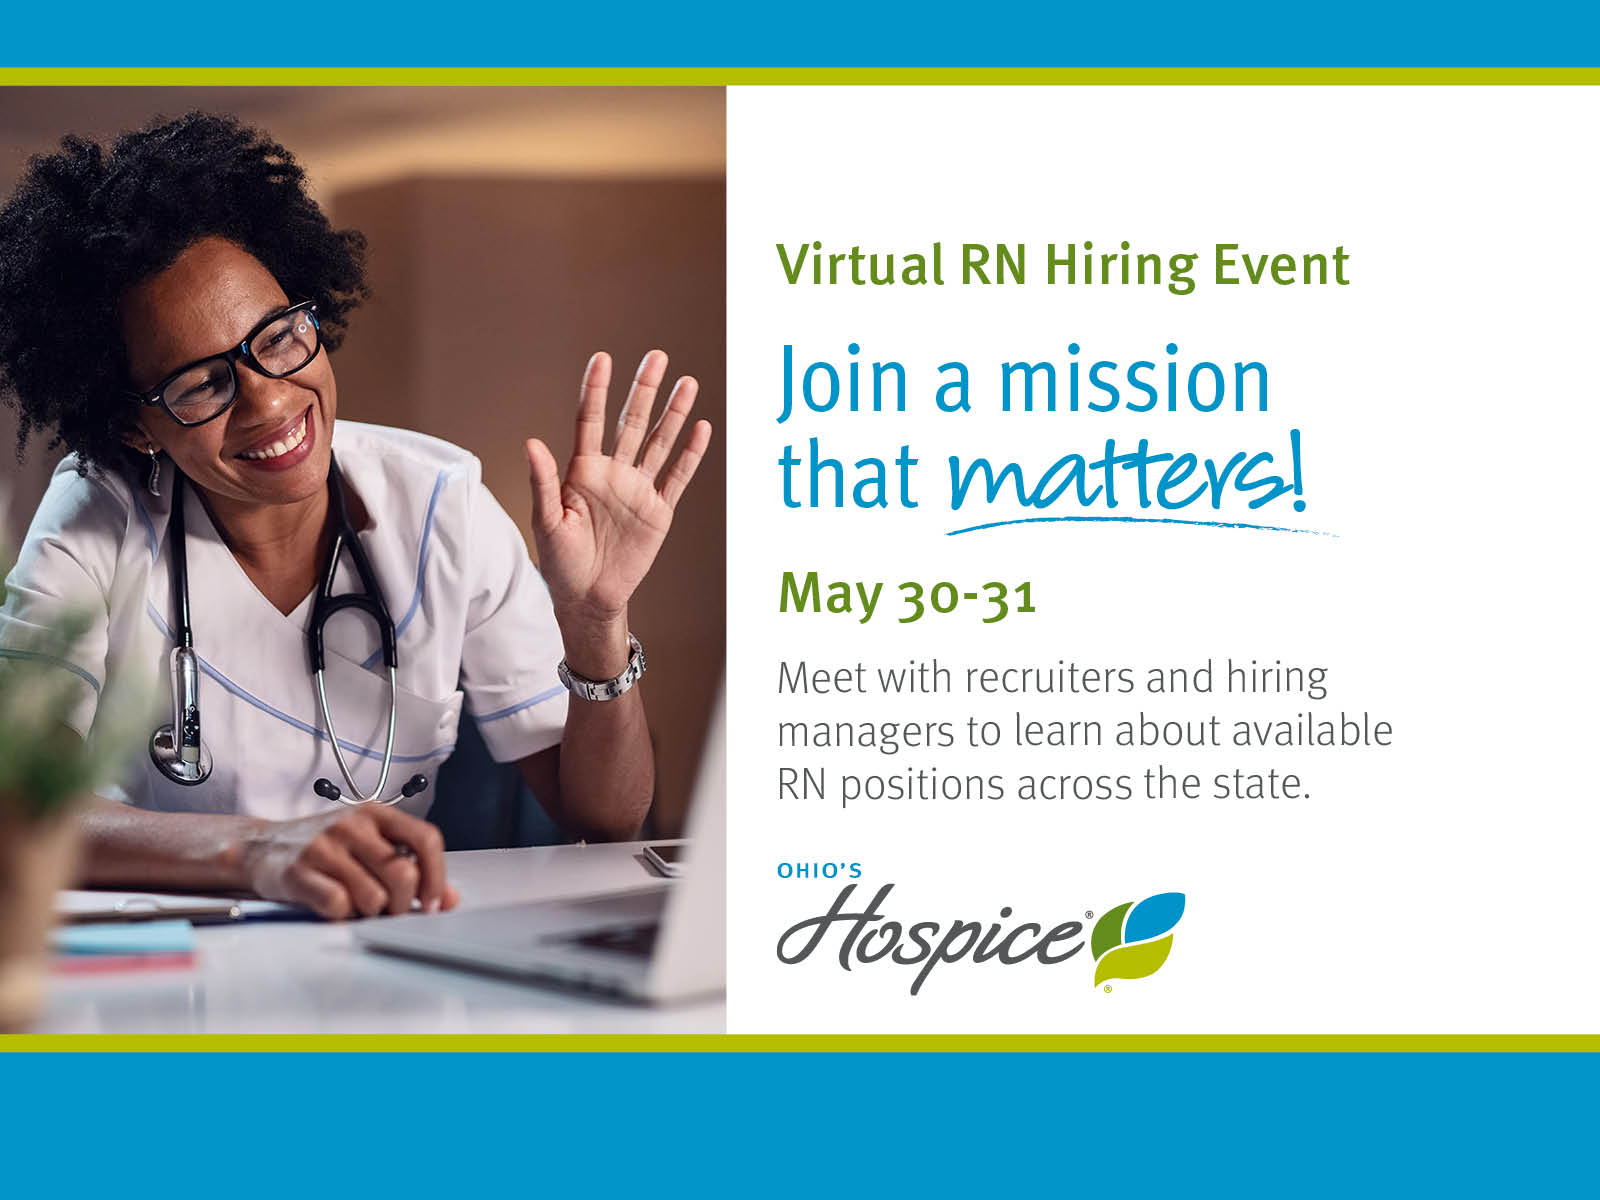 Virtual RN Hiring Event | May 30-31 Join a mission that matters! Meet with recruiters and hiring managers to learn about available RN positions across the state. Ohio's Hospice